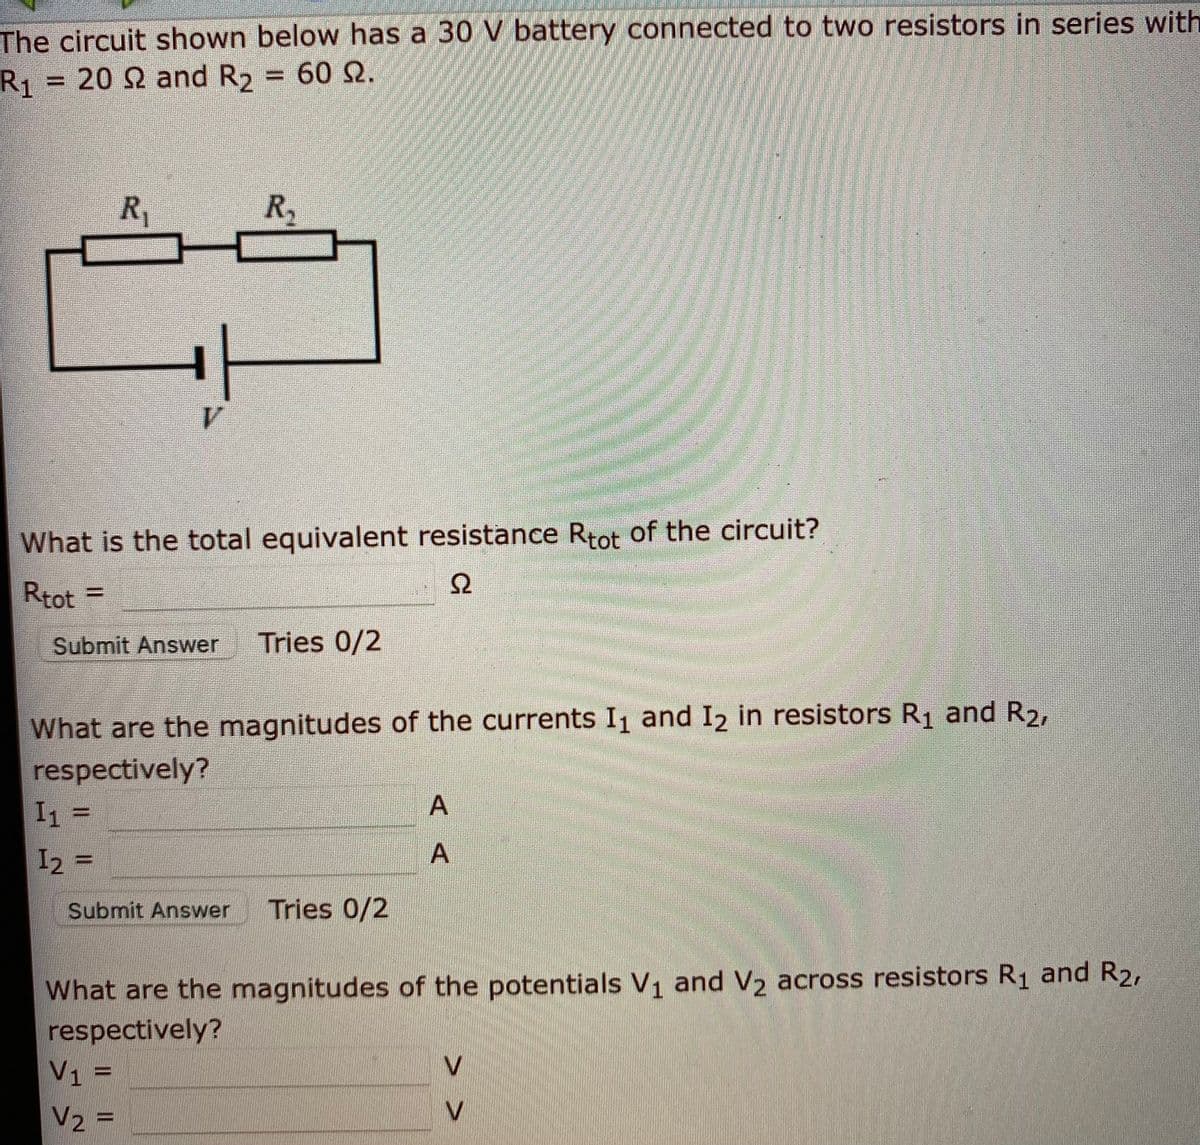 The circuit shown below has a 30 V battery connected to two resistors in series with
R1 = 20 Q and R2 = 60 2.
R,
R,
What is the total equivalent resistance Rtot of the circuit?
Rtot =
%3D
Submit Answer
Tries 0/2
What are the magnitudes of the currents I and I2 in resistors R and R2,
respectively?
I1 =
I2 =
%3D
Submit Answer
Tries 0/2
What are the magnitudes of the potentials V1 and V2 across resistors R1 and R2,
respectively?
V1 =
V2 =
V.
%3D
V
%3D
AA
